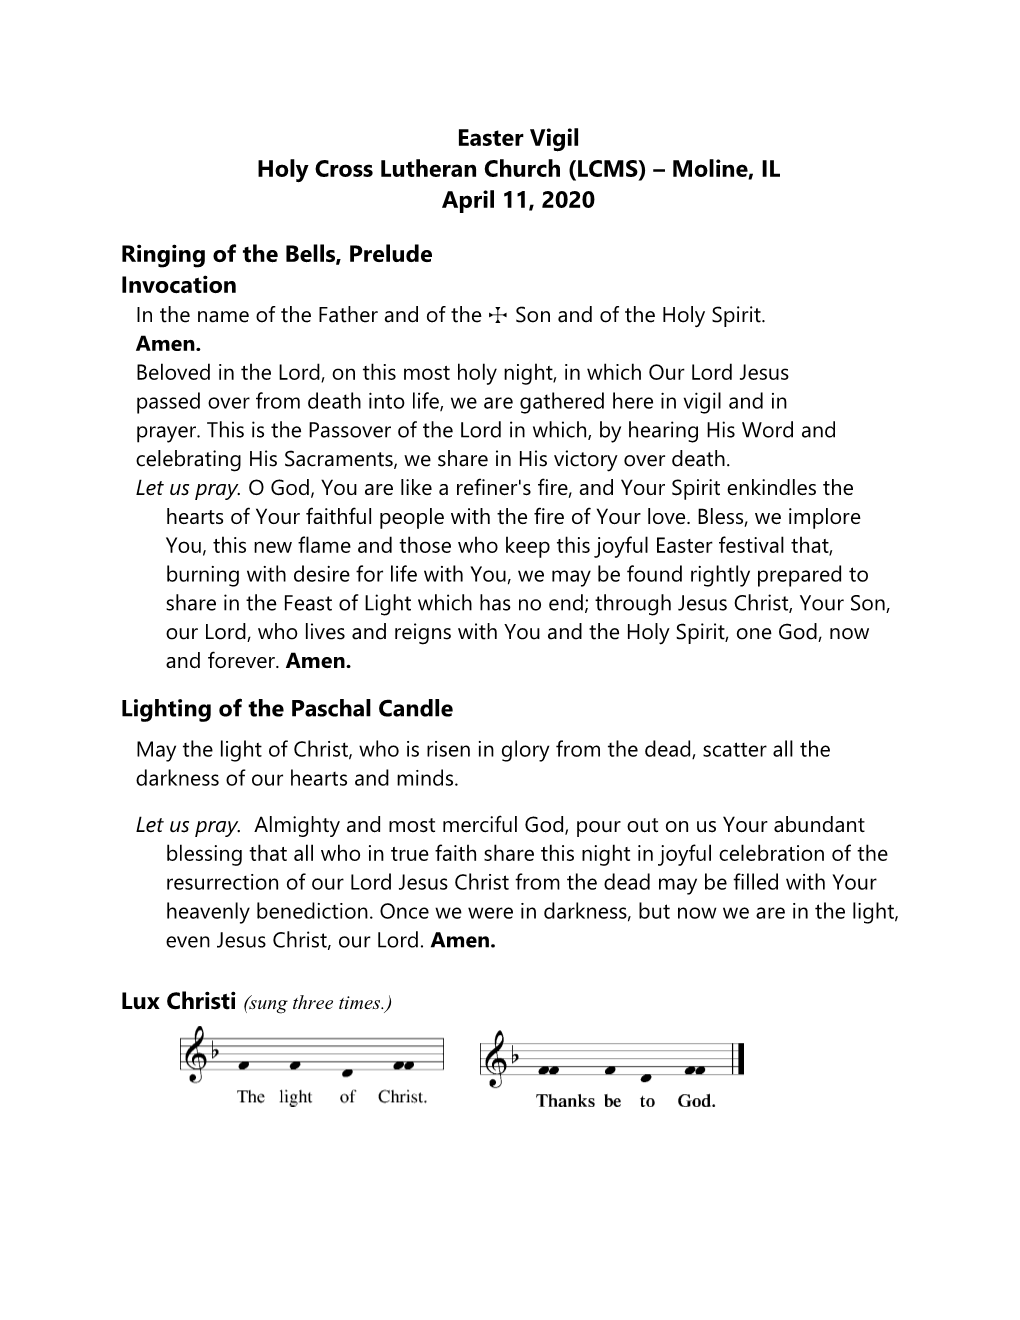 Easter Vigil Holy Cross Lutheran Church (LCMS) – Moline, IL April 11, 2020 Ringing of the Bells, Prelude Invocation Lighting O